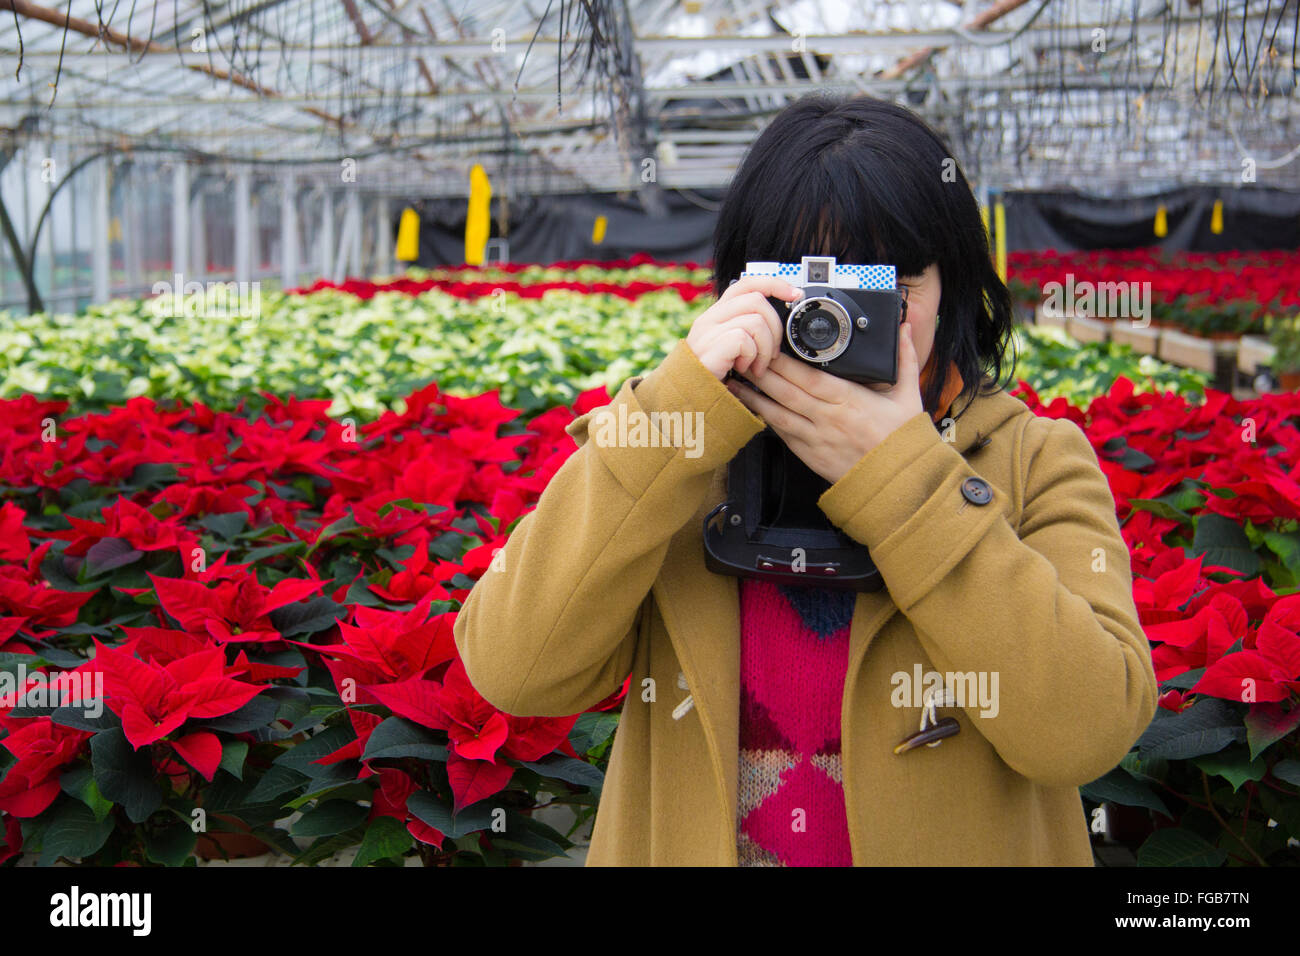 A woman takes a picture with a Diana lomography camera inside a greenhouse in Hellisheiðarvirkjun, Iceland, Stock Photo